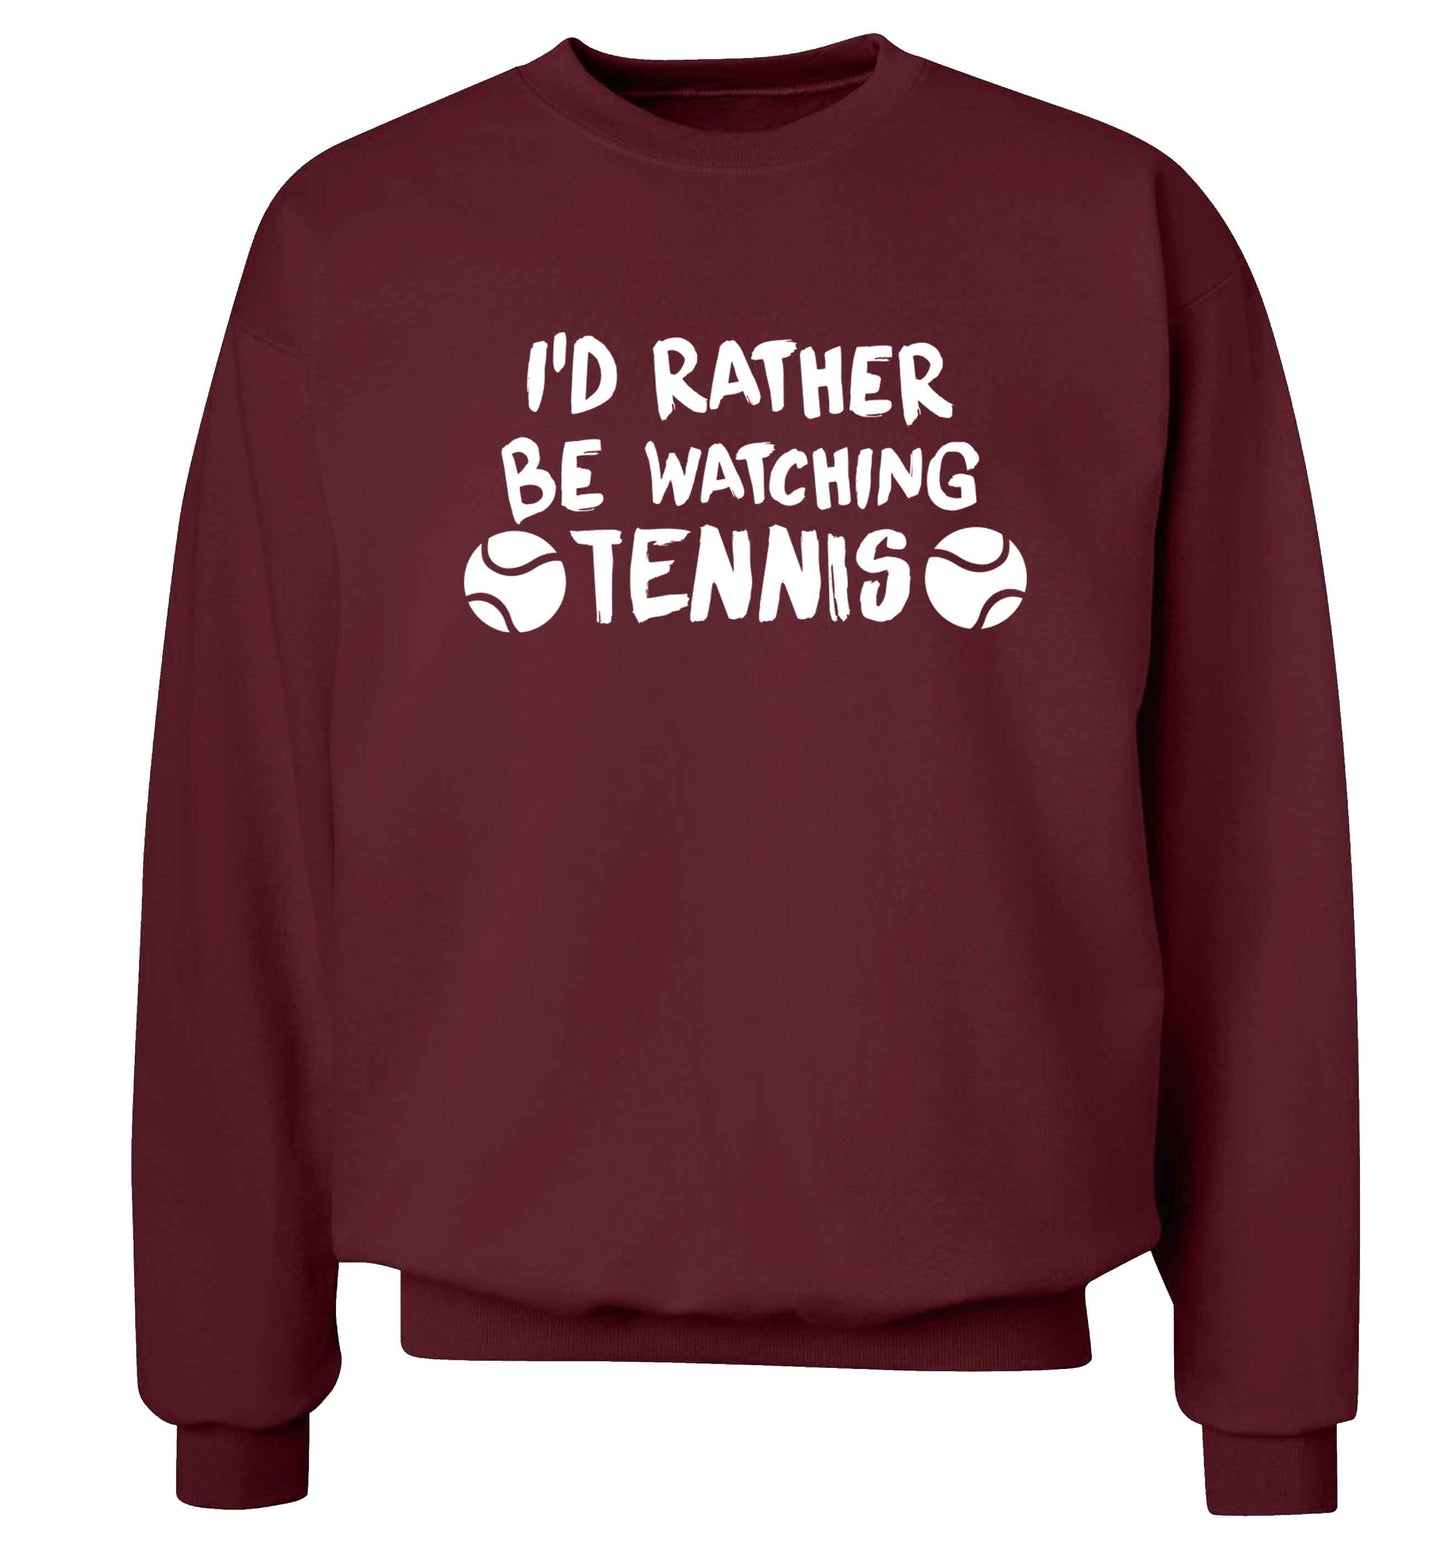 I'd rather be watching the tennis Adult's unisex maroon Sweater 2XL